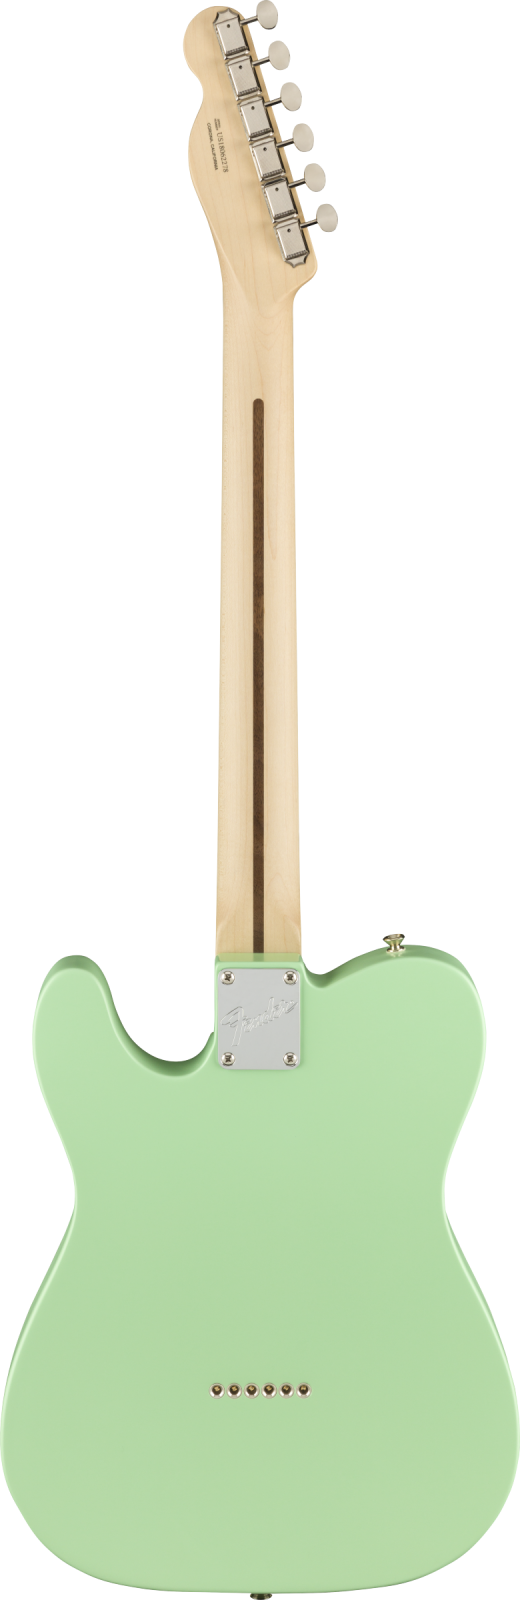 Fender American Performer Telecaster with Humbucking - Rosewood Fingerboard, Satin Surf Green